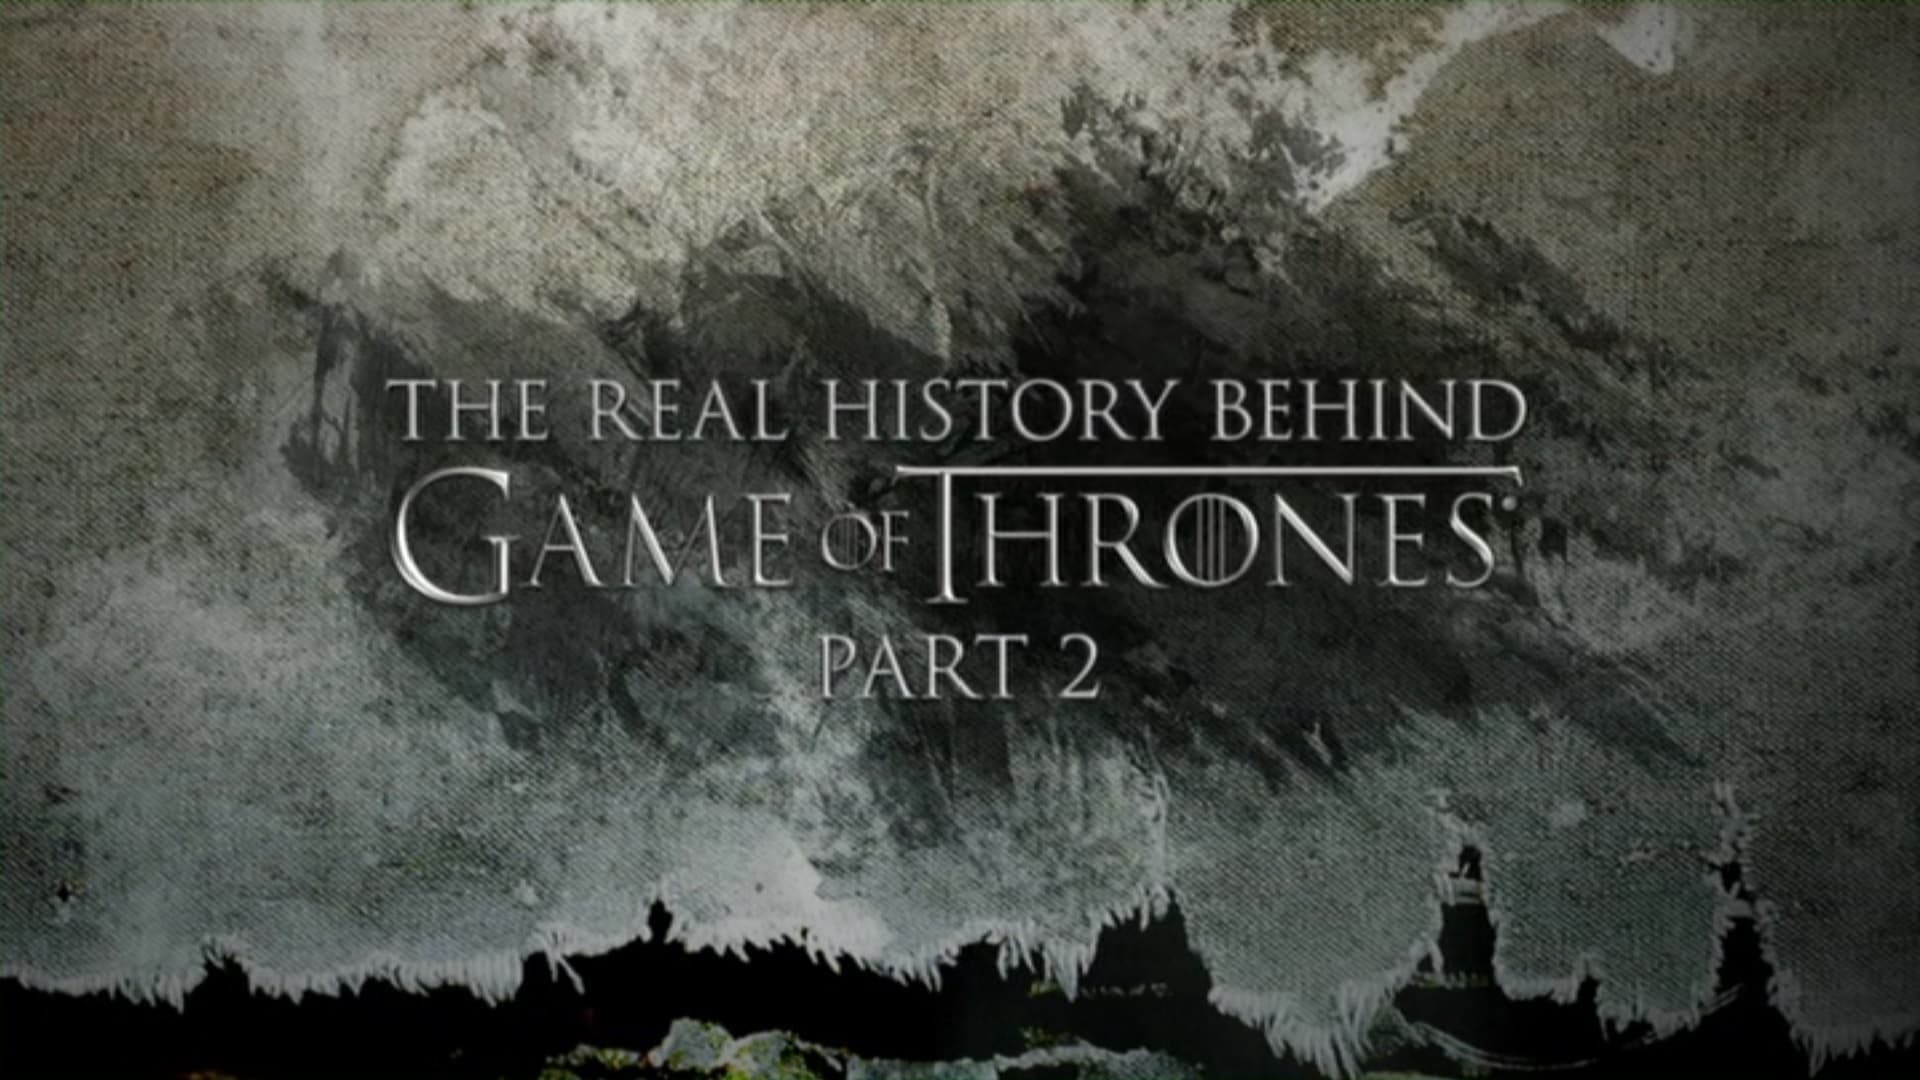 Game of Thrones Season 0 :Episode 179  The Real History Behind Game of Thrones (Part 2)